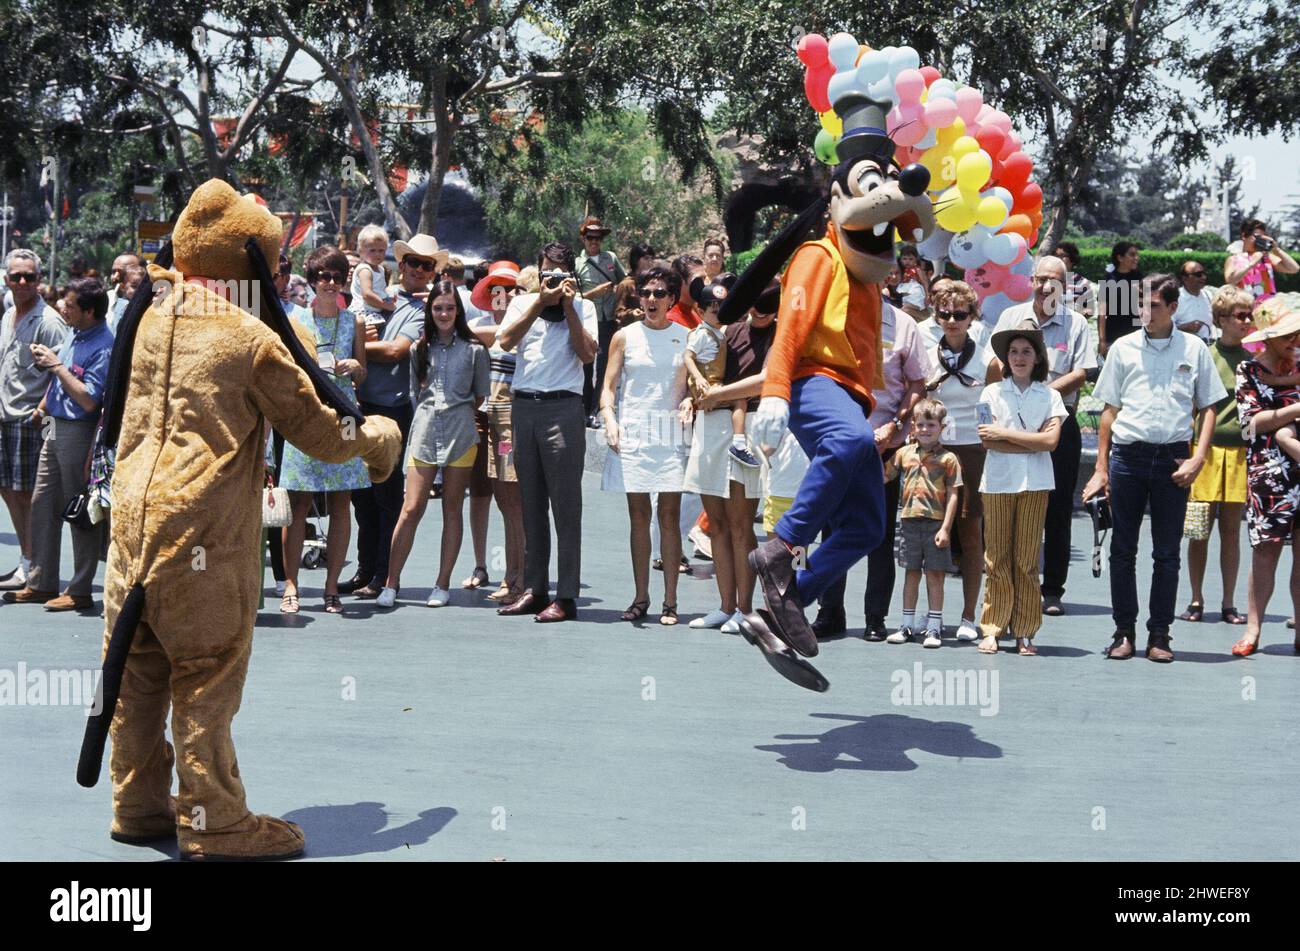 Scenes at the Disneyland theme park in Anaheim, California, United States.  Disney canine characters Pluto and Goofy during the Main Street parade. June 1970. Stock Photo